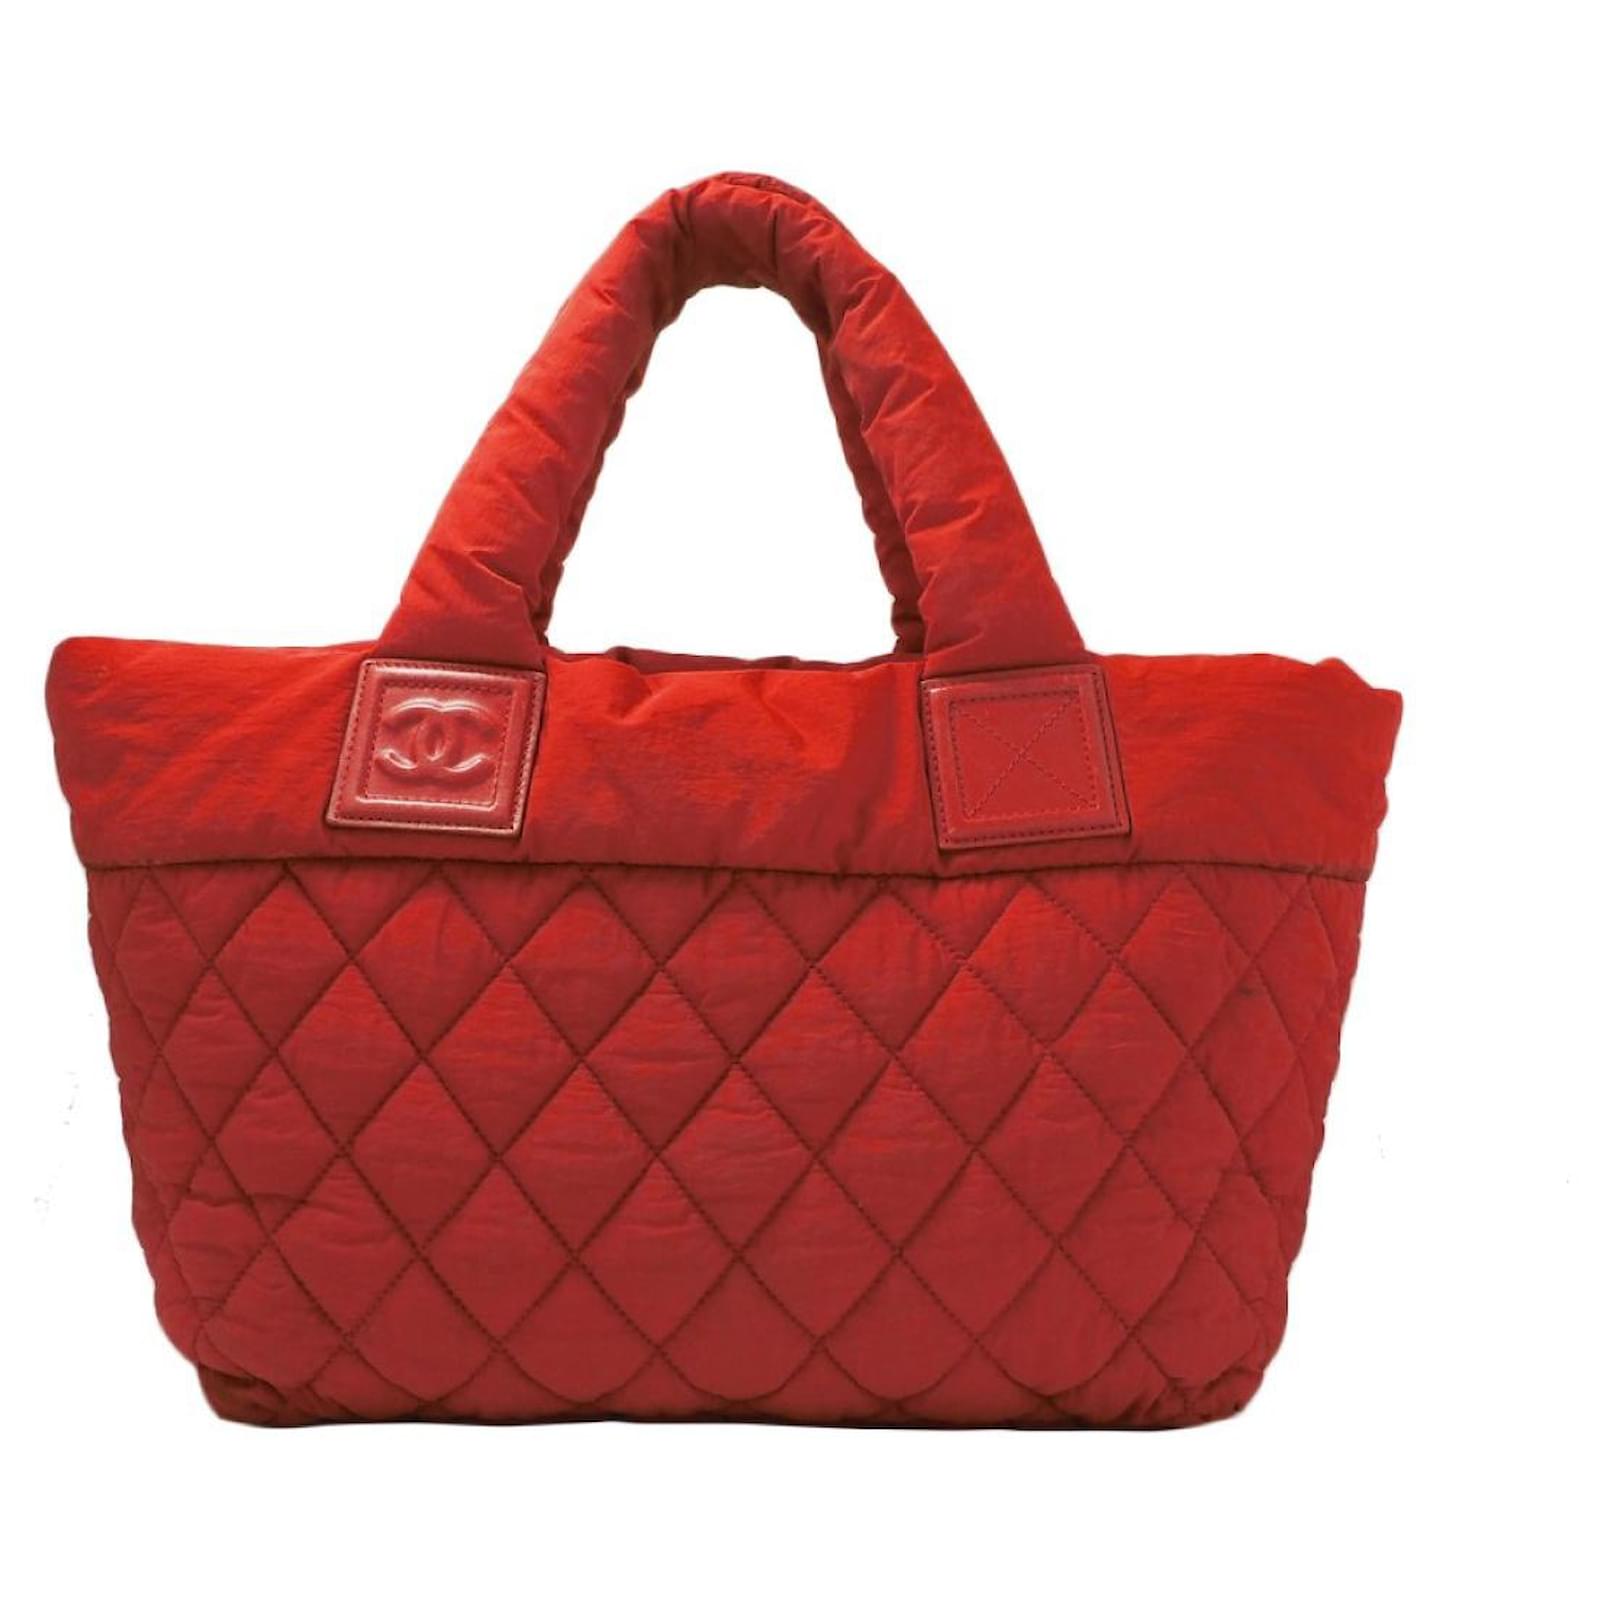 Chanel cocoon leather - Gem